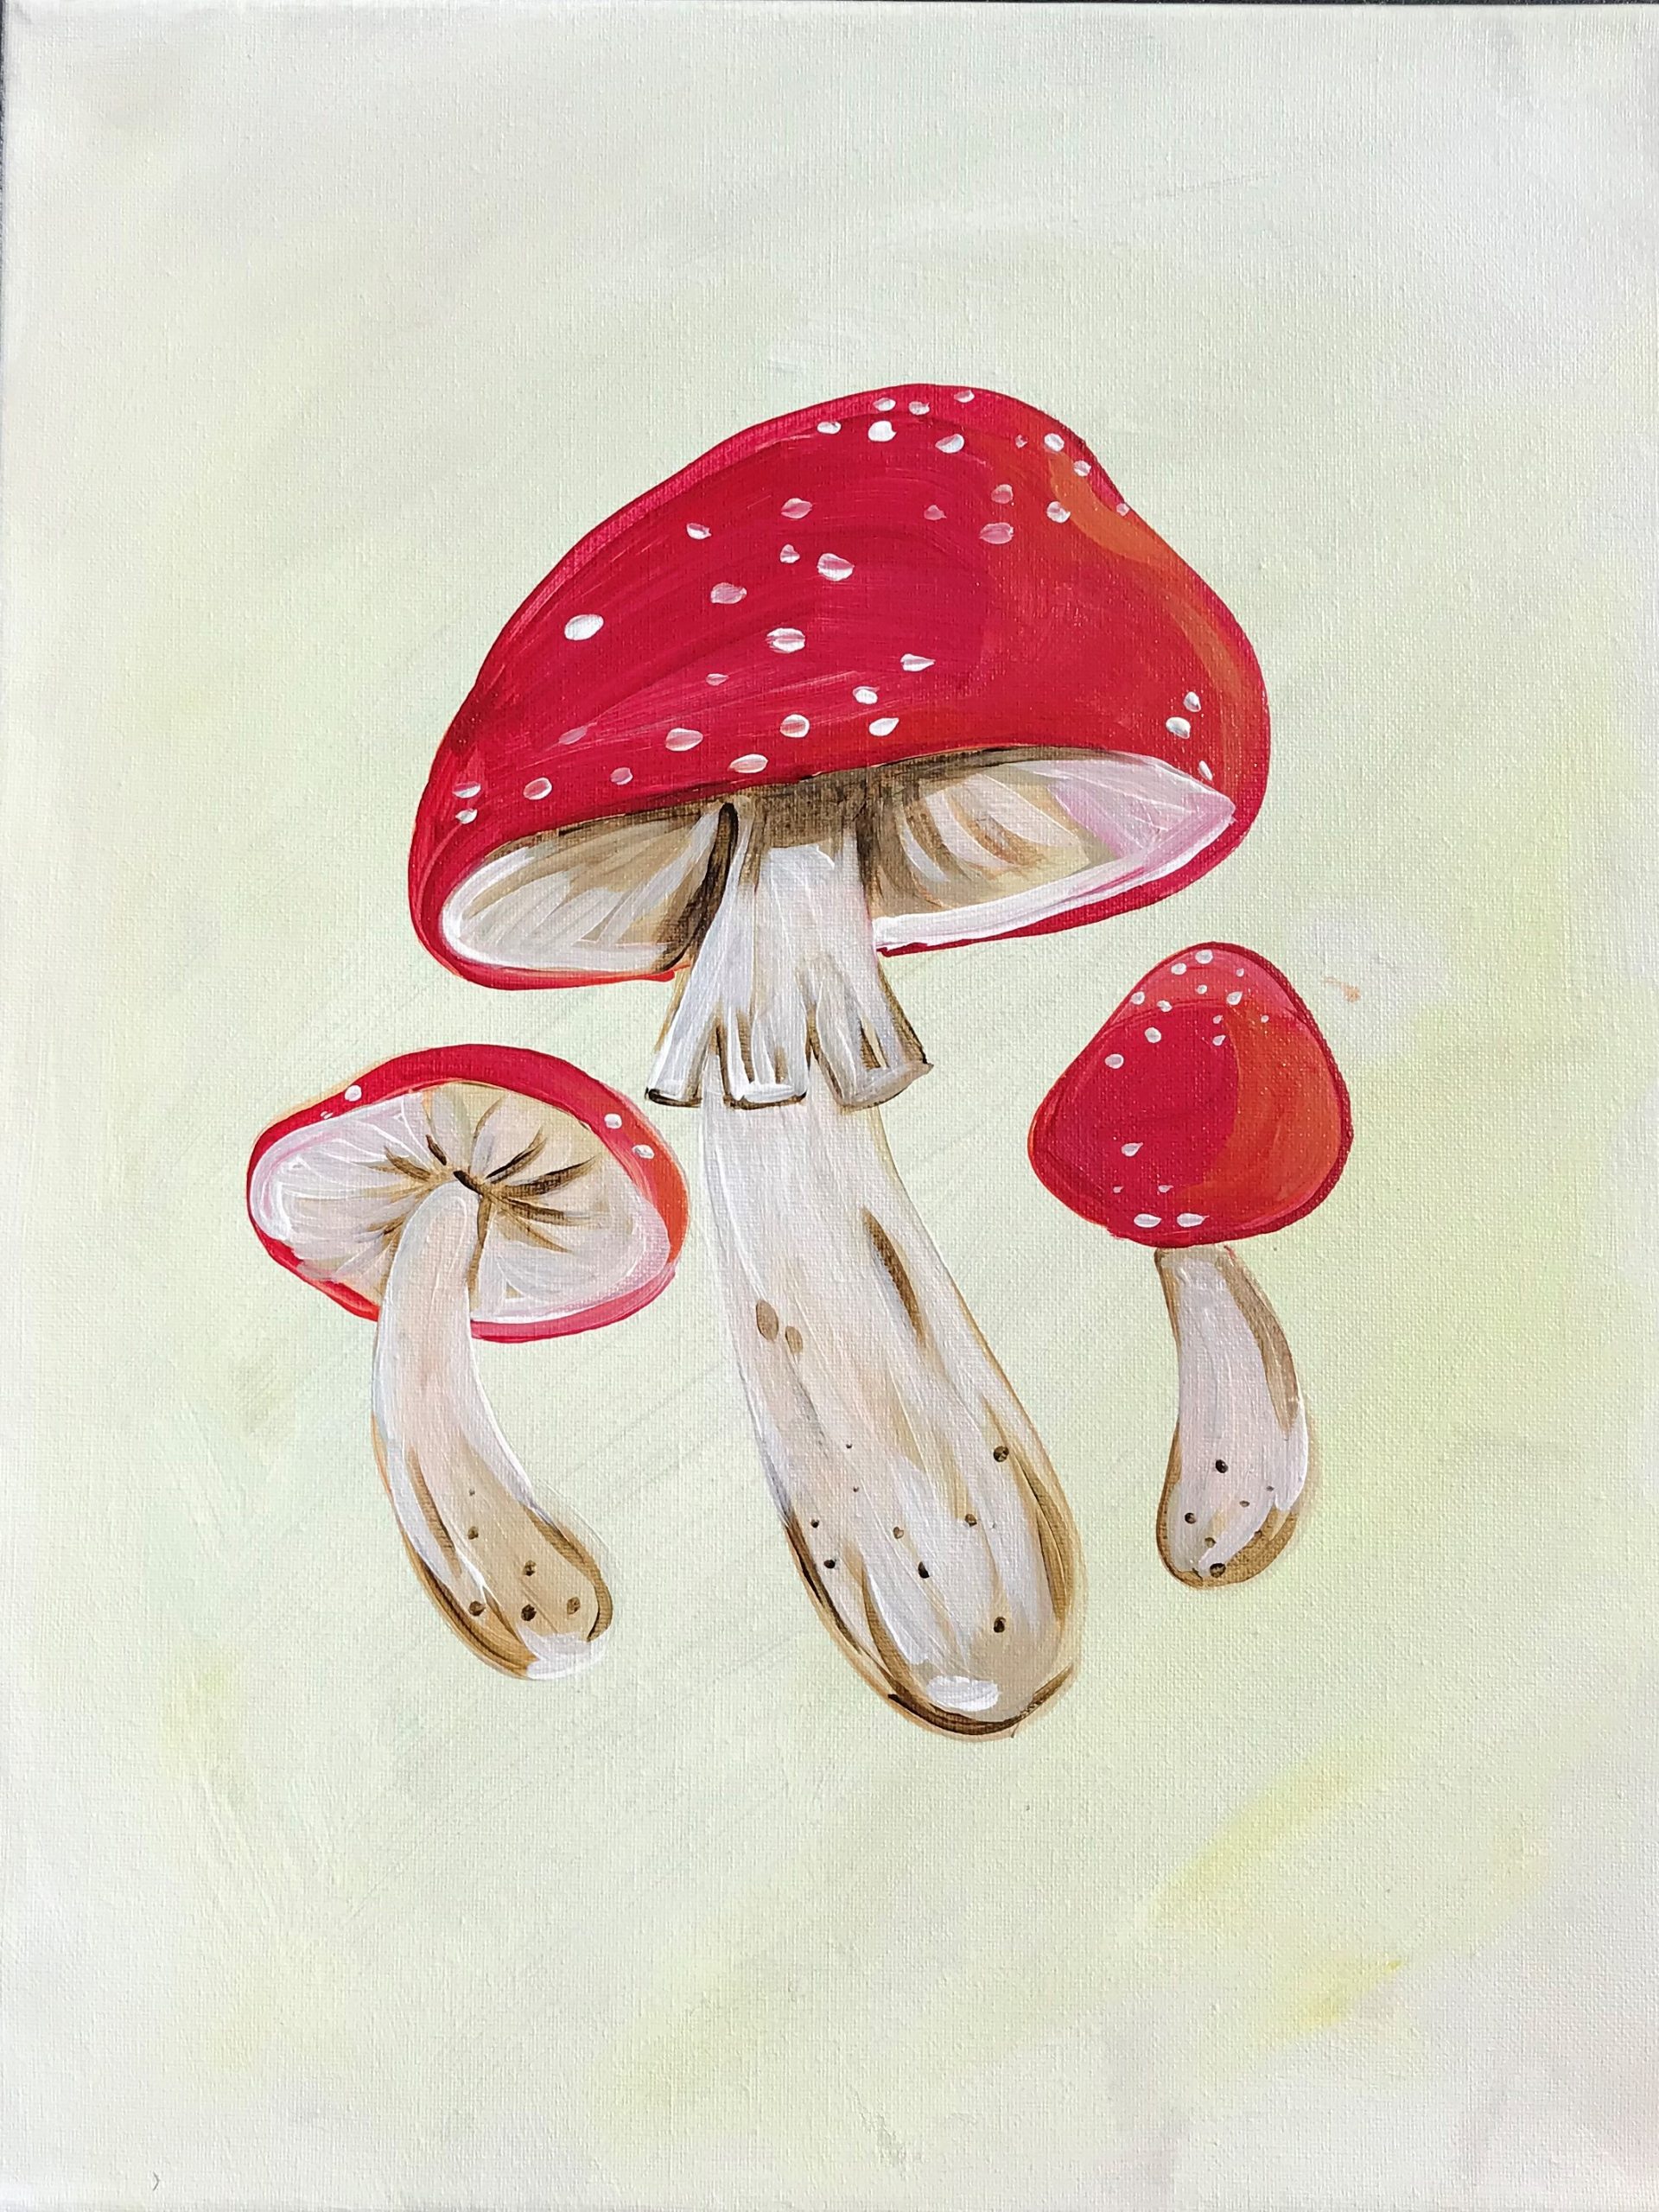 An image of a painting of mushrooms.